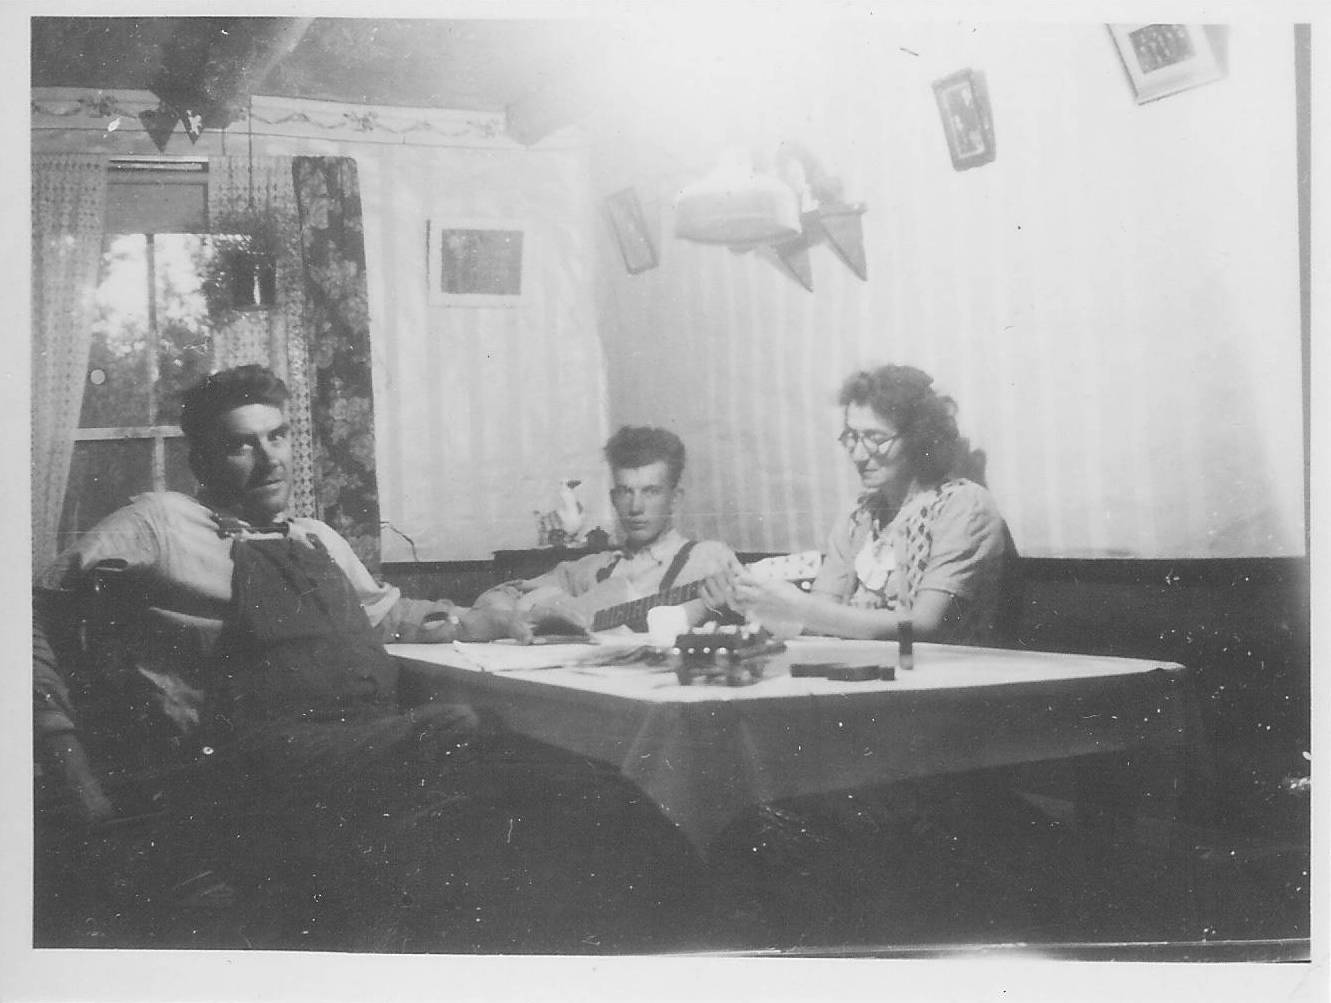 Anyone recognize these fine folks? The photo comes from the Bailey G, Cook collection if that gives a clue!
990.4.3.27 / Bailey G, Cook.